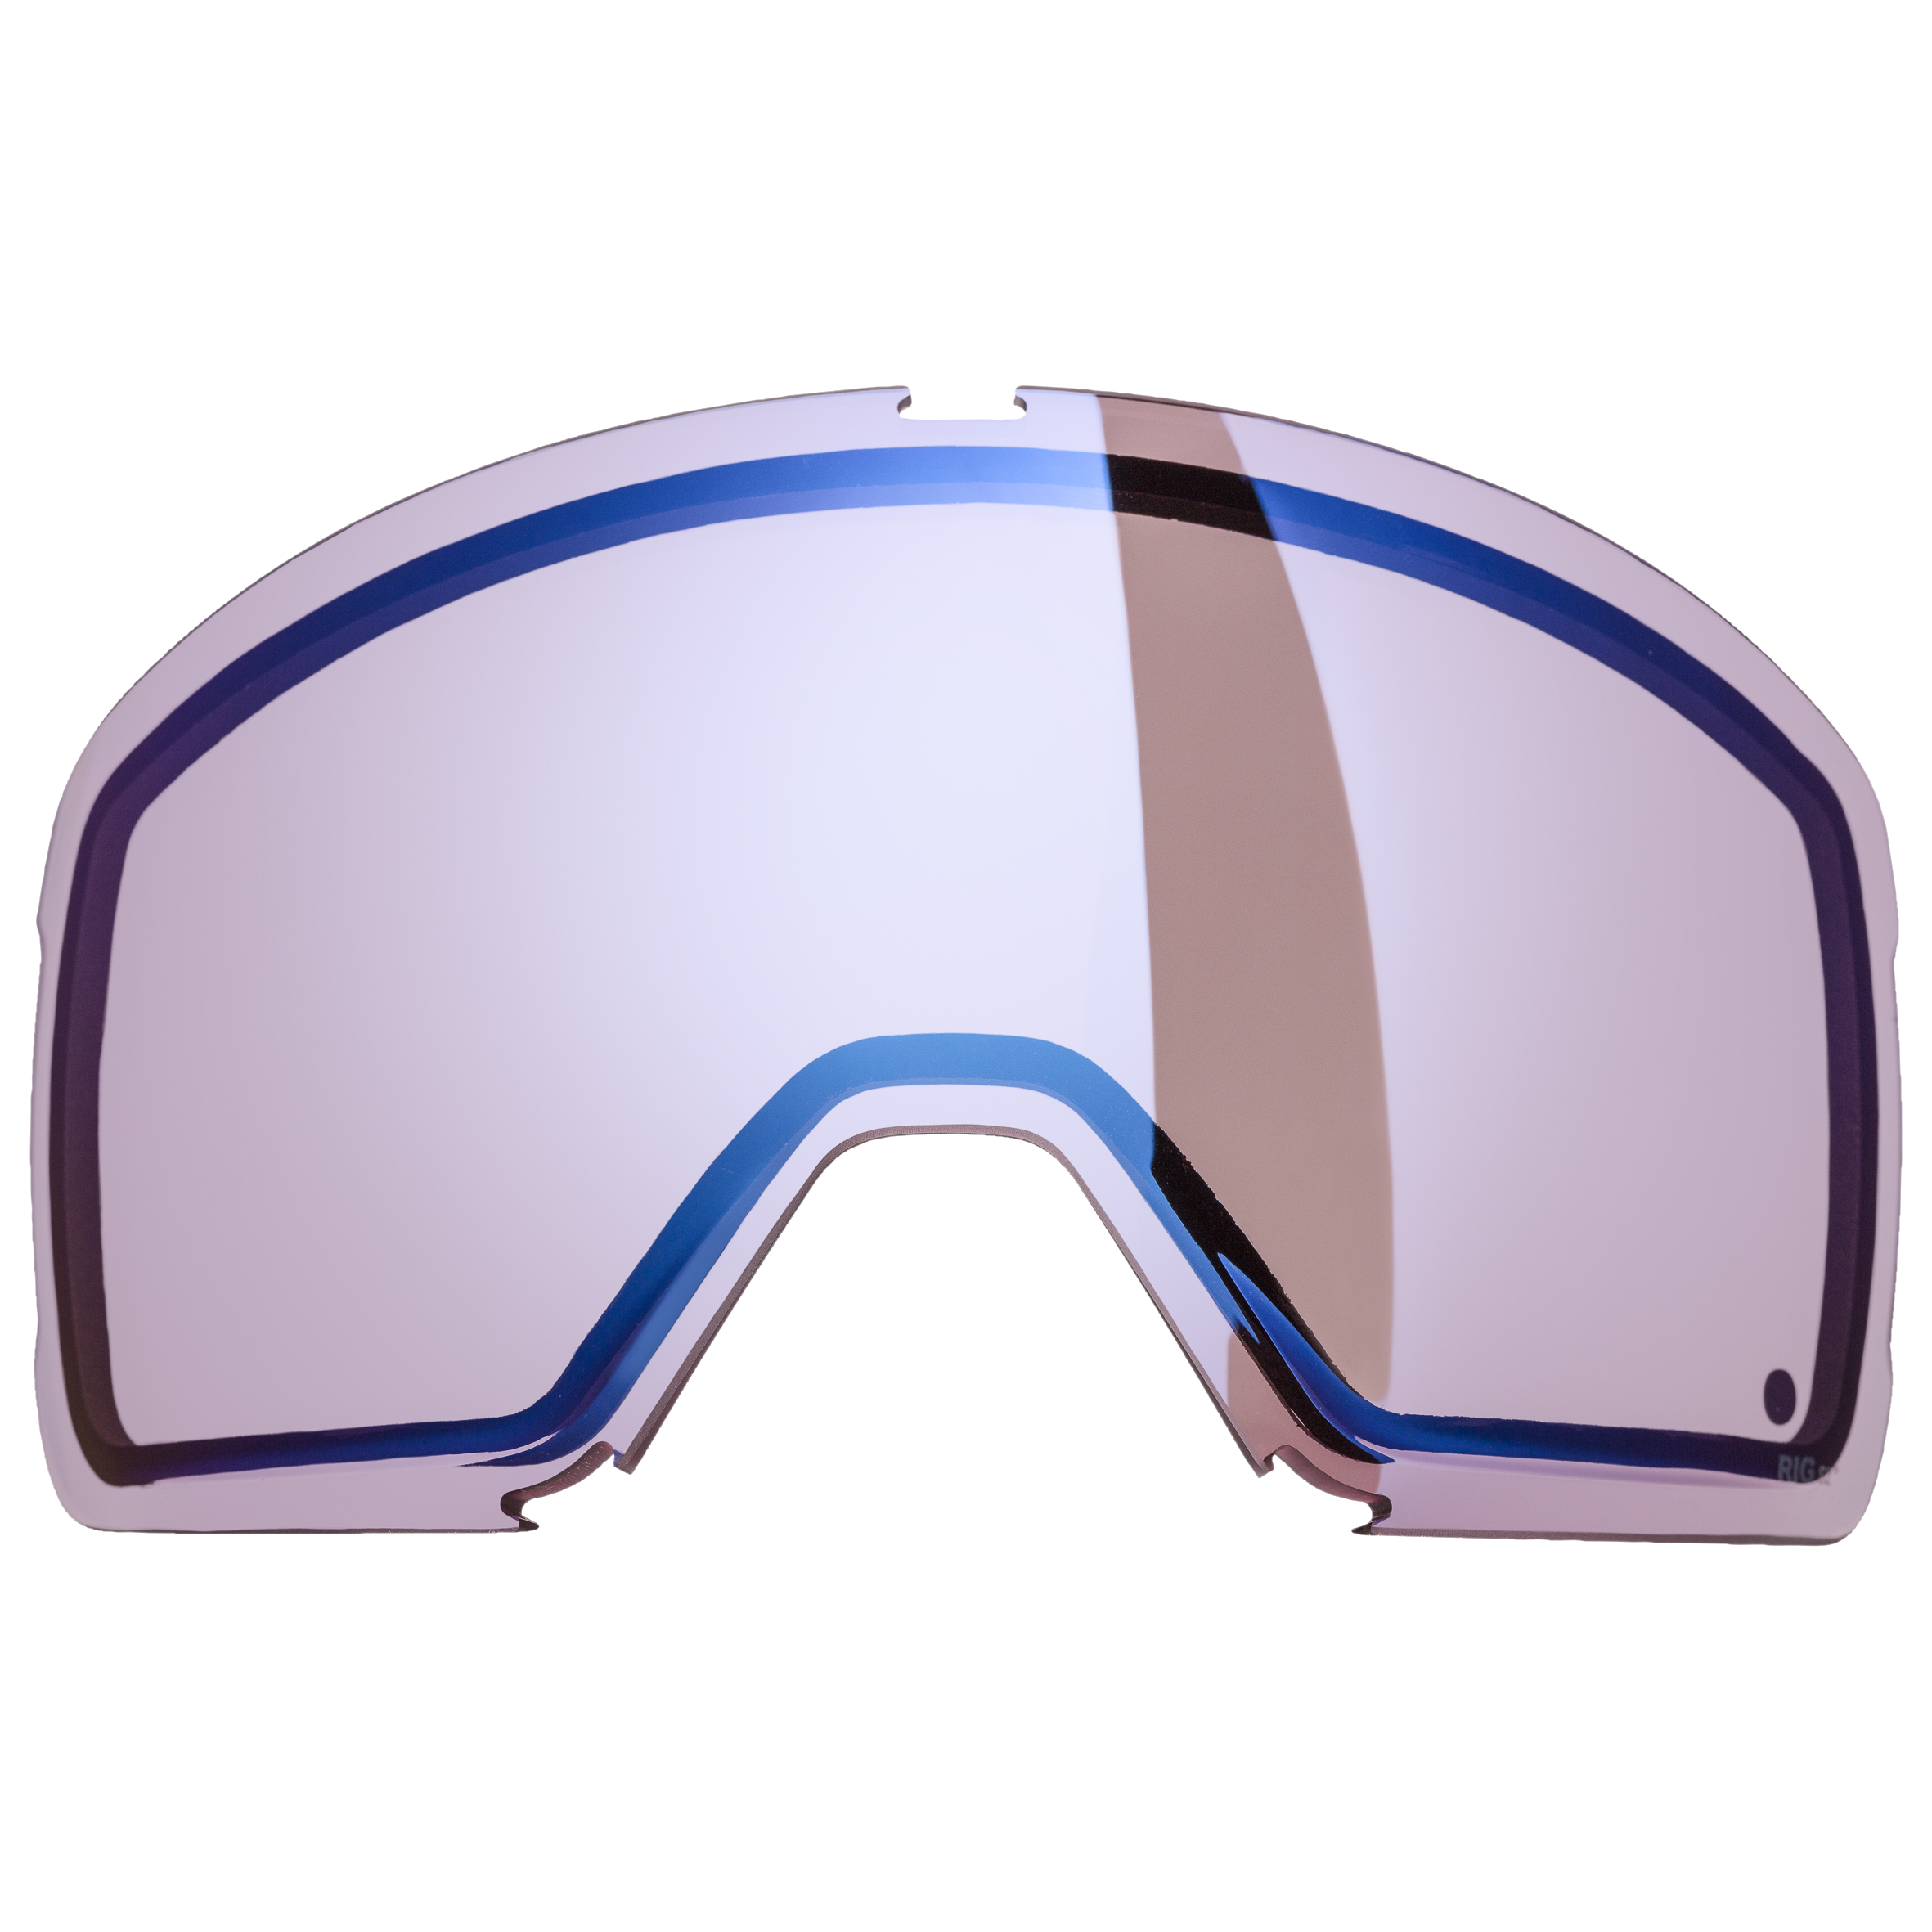 Clockwork MAX RIG® Reflect Goggles with Extra Lens